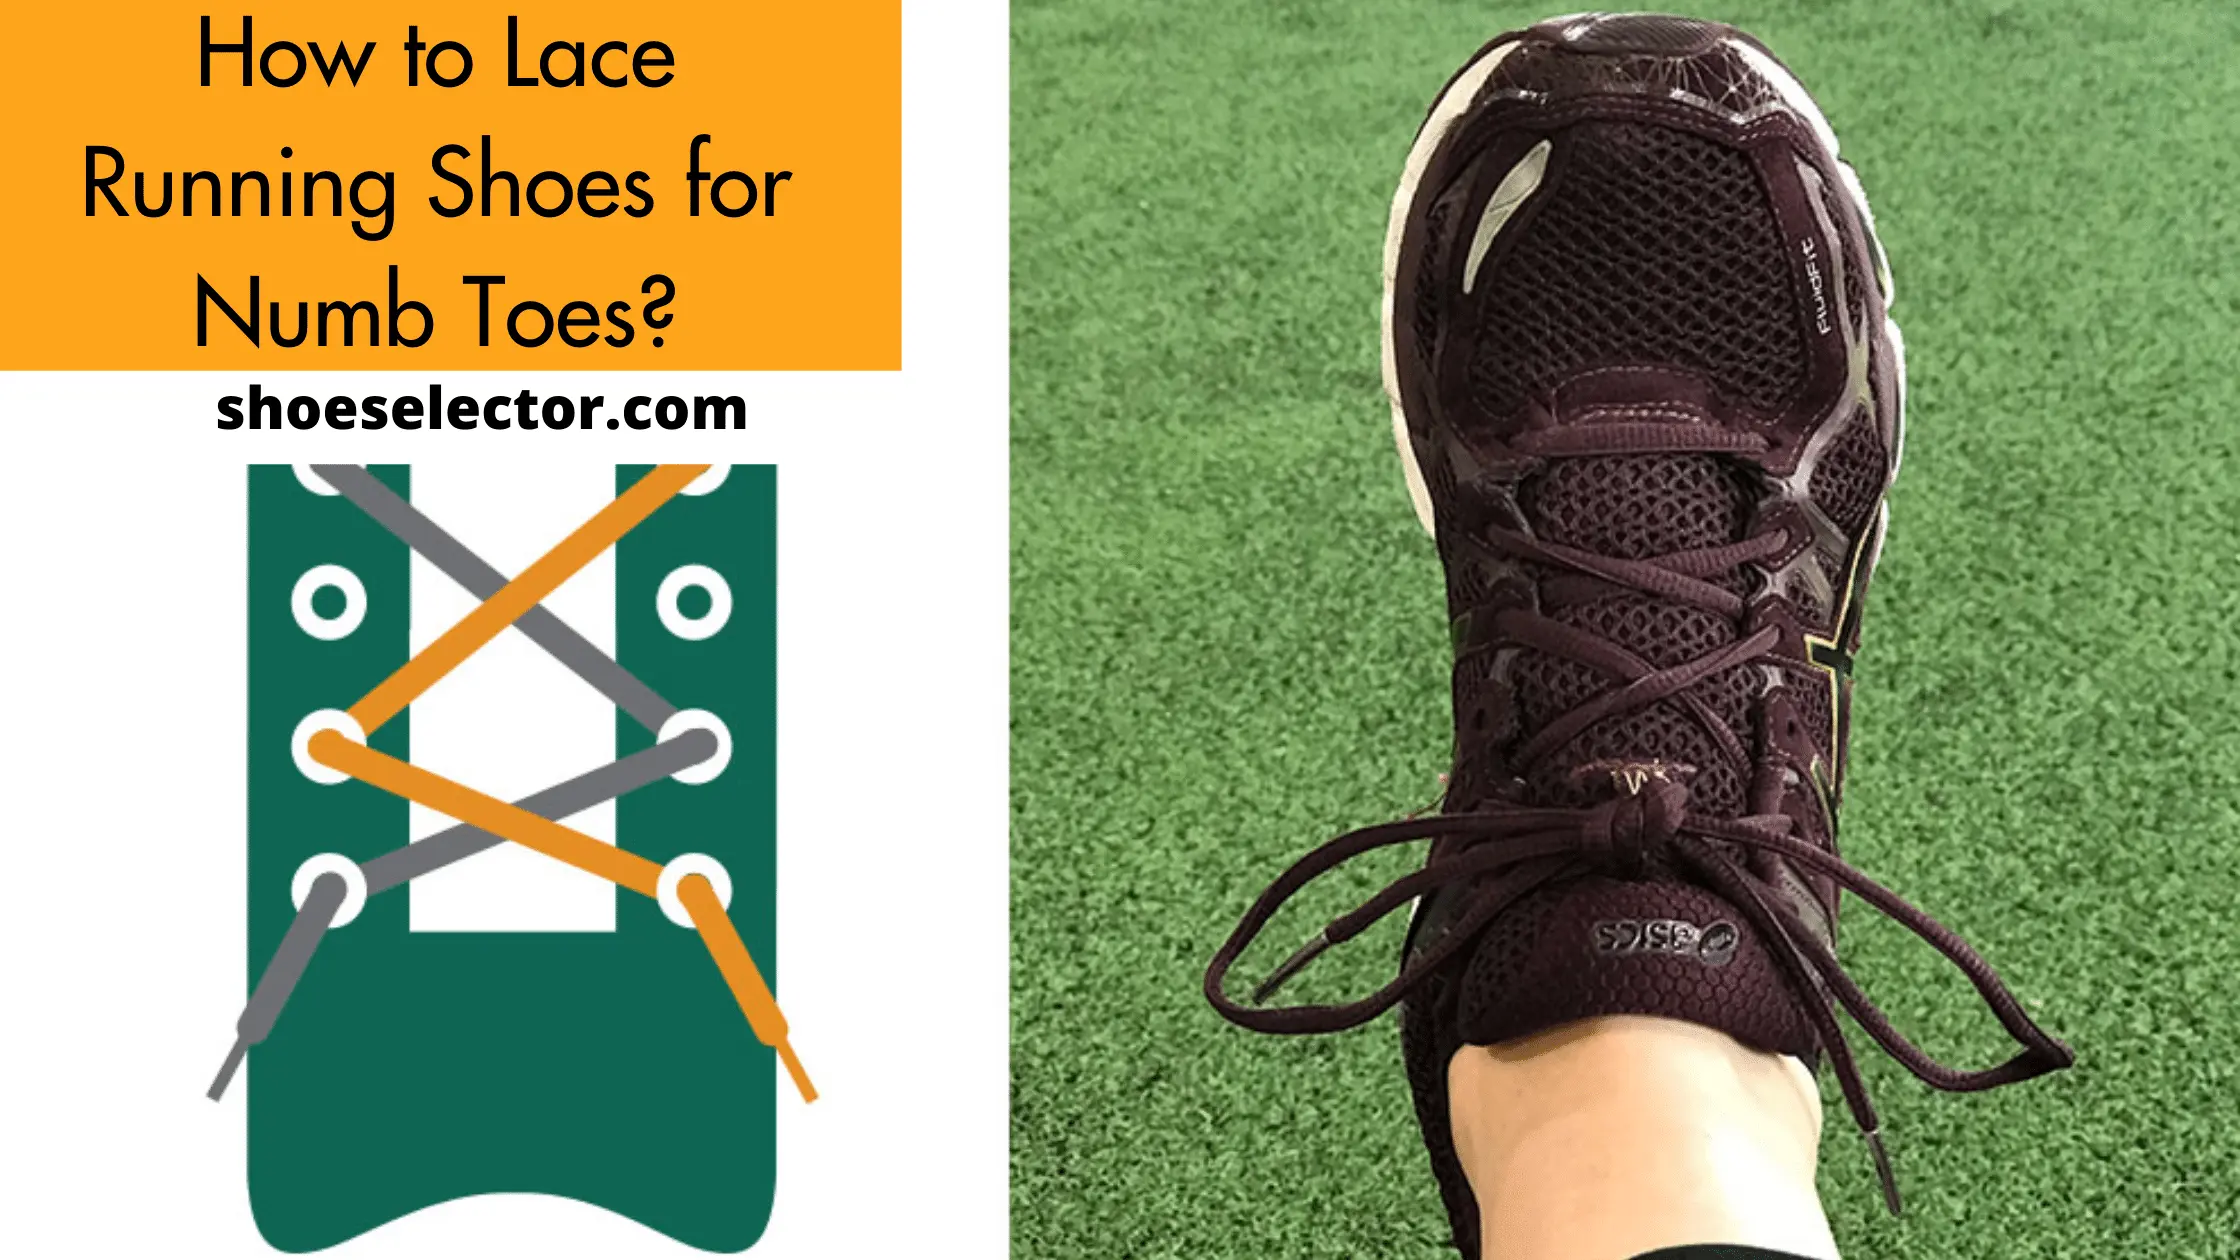 How to Lace Running Shoes for Numb Toes? - Latest Guide